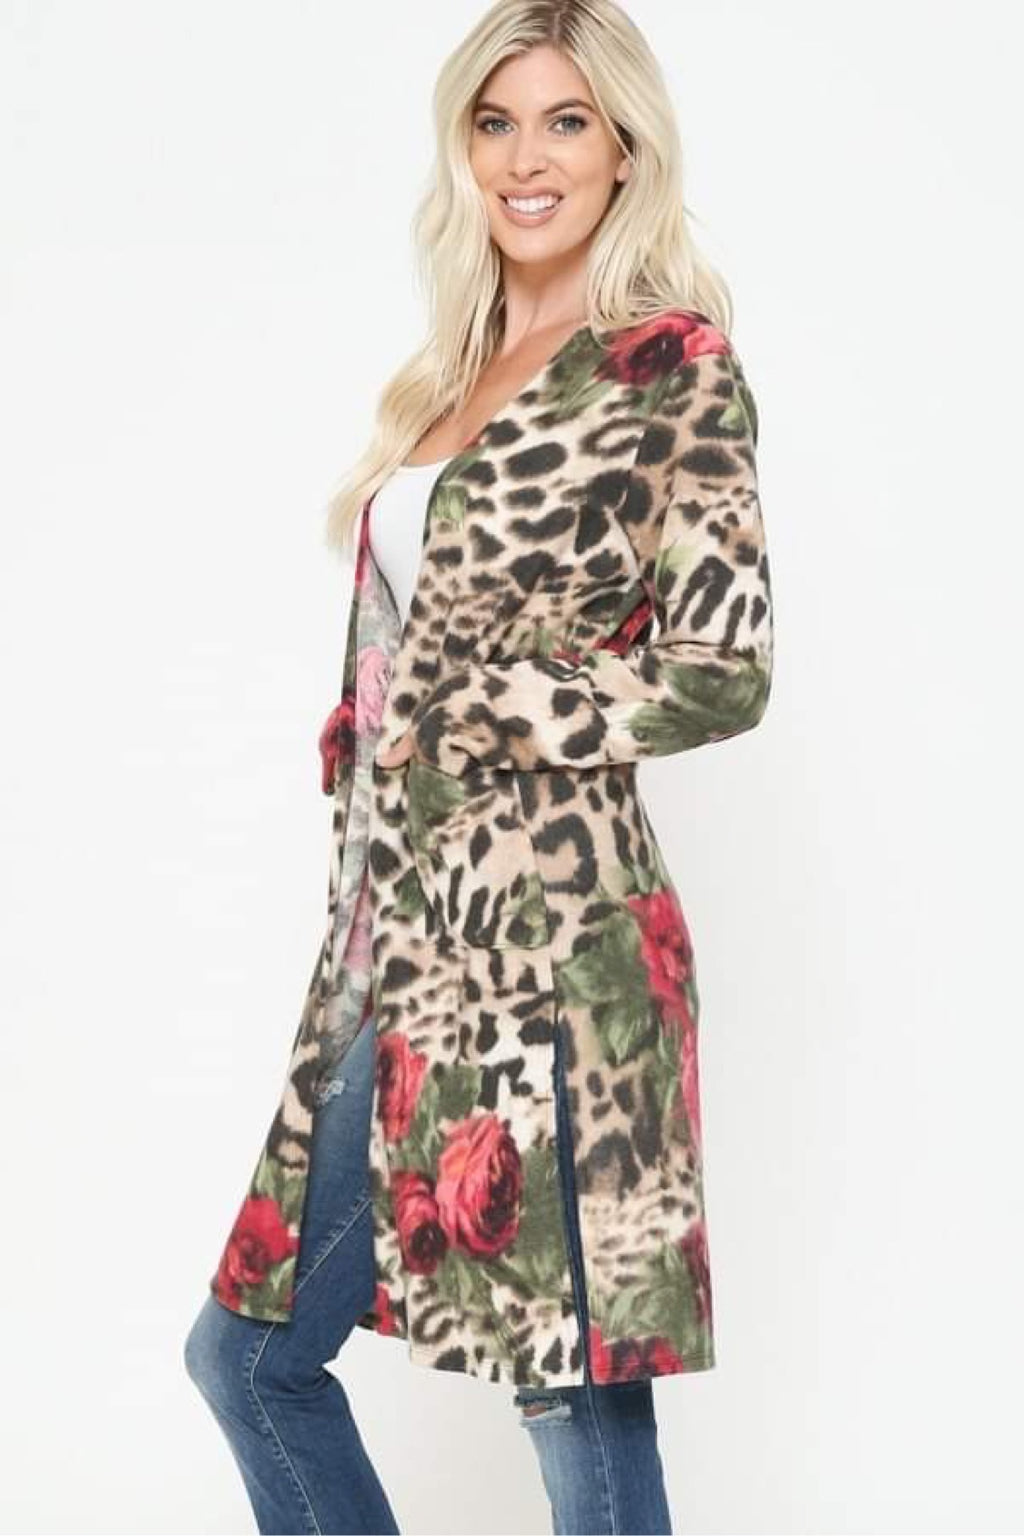 RED FLORAL KIMONO WITH LEOPARD PRINT & POCKETS - Lil Monkey Boutique